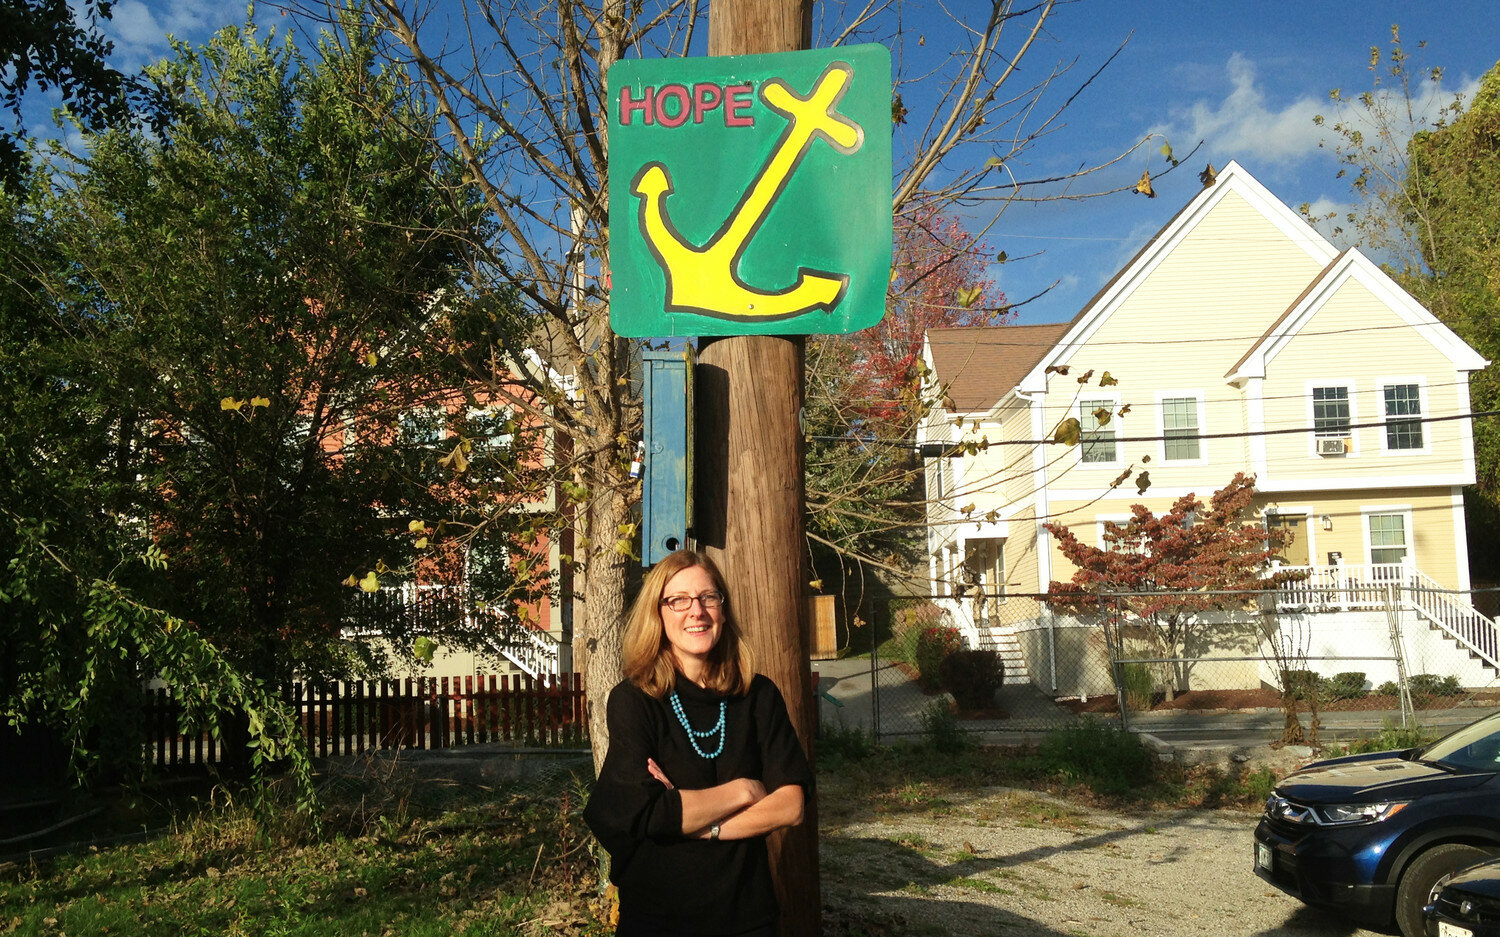 Jennifer Hawkins, director of the ONE Neighborhood Builders community development corporation, standing in Riverside Park, with some of the new homes her group has developed in Olneyville behind her, during a trolley tour organized by Rhode Island Housing in 2017. Photo by Richard Asinof/ConvergenceRI